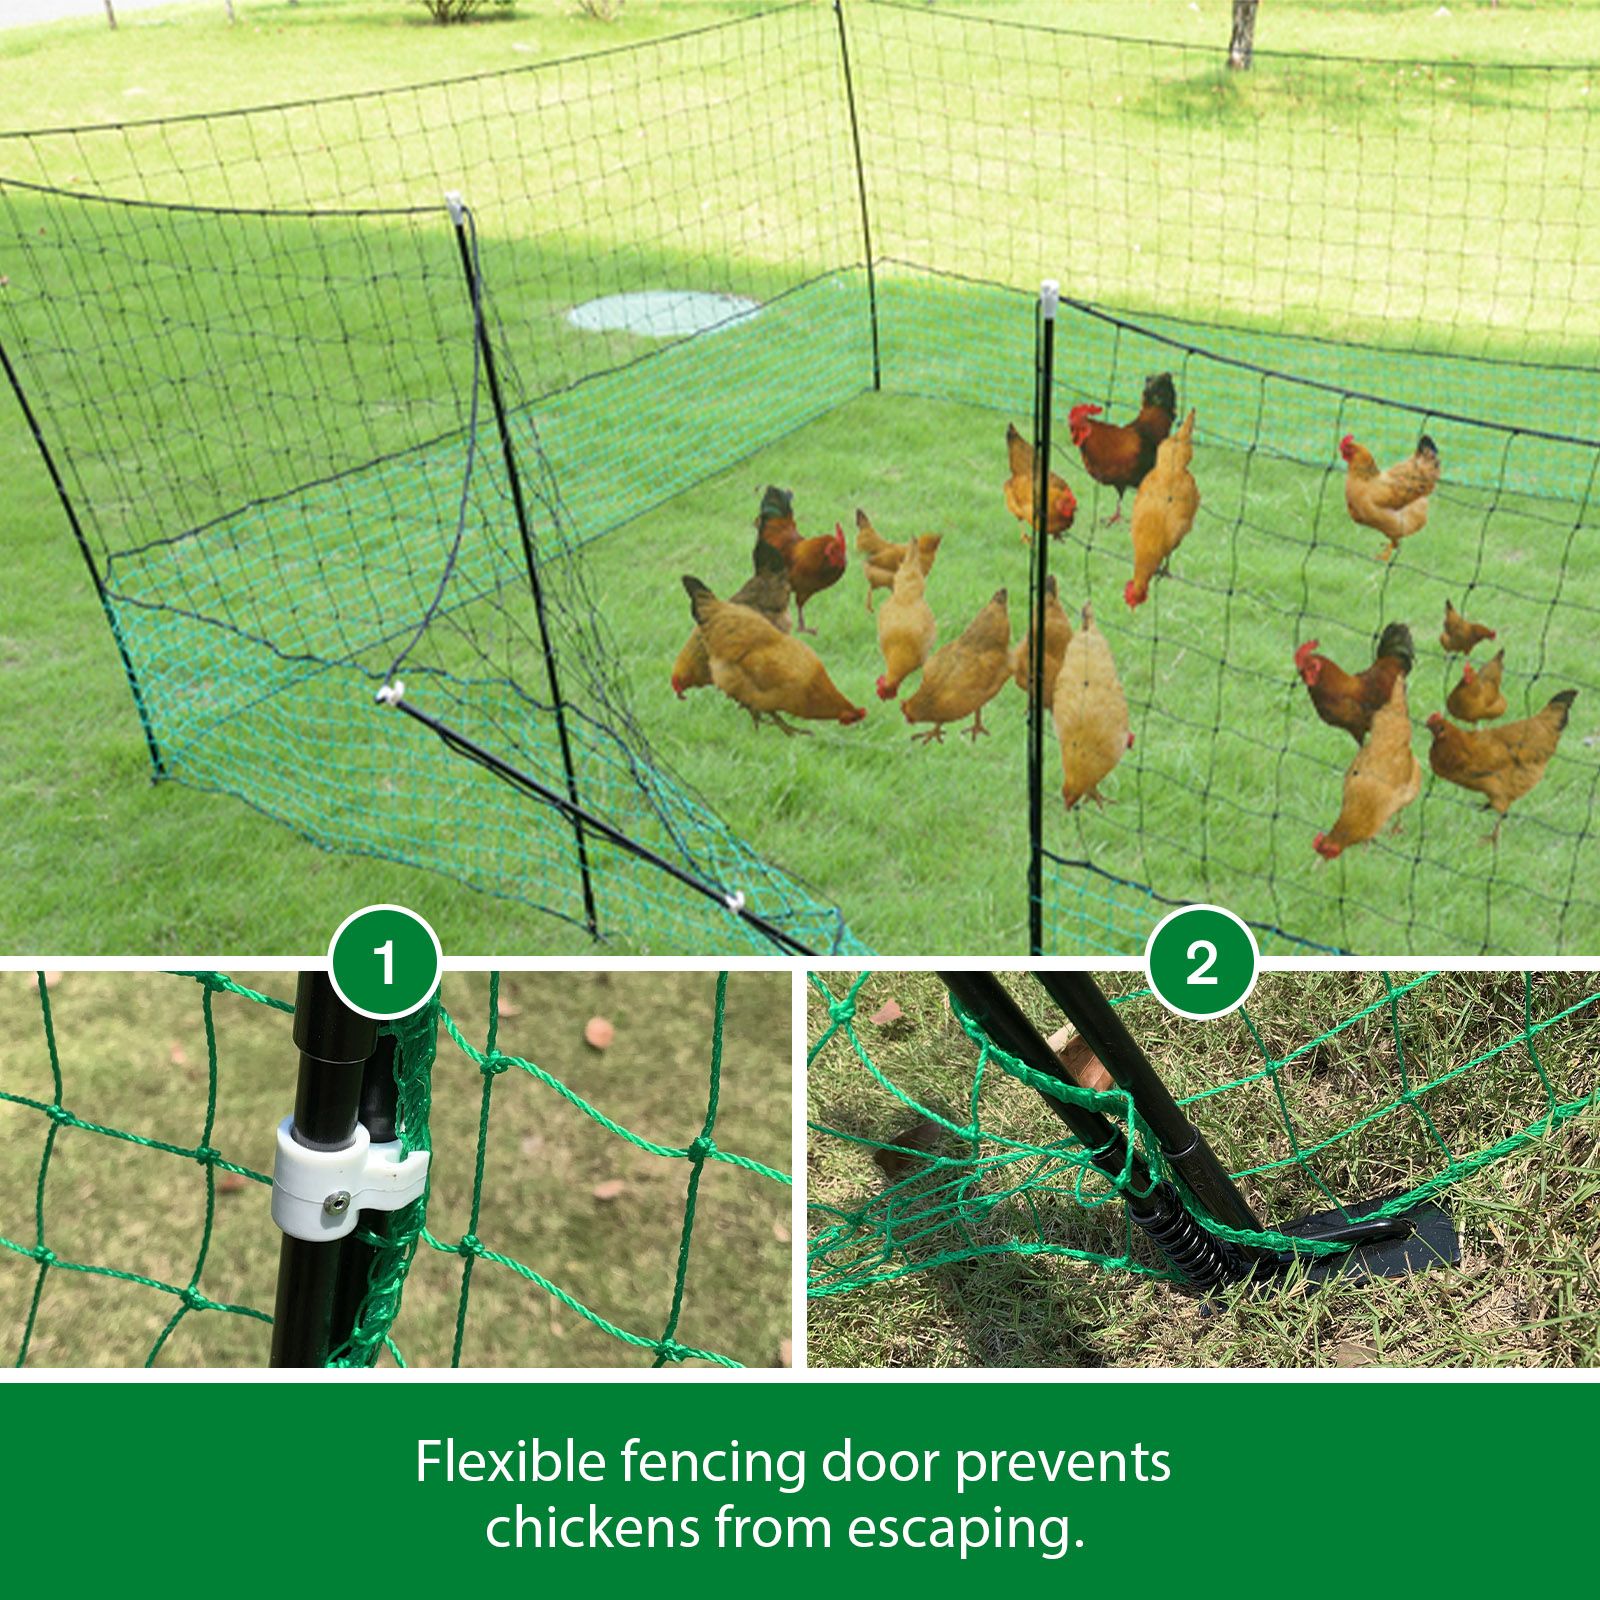 Large Catching Net for Poultry and Small Animal ECNL Togo